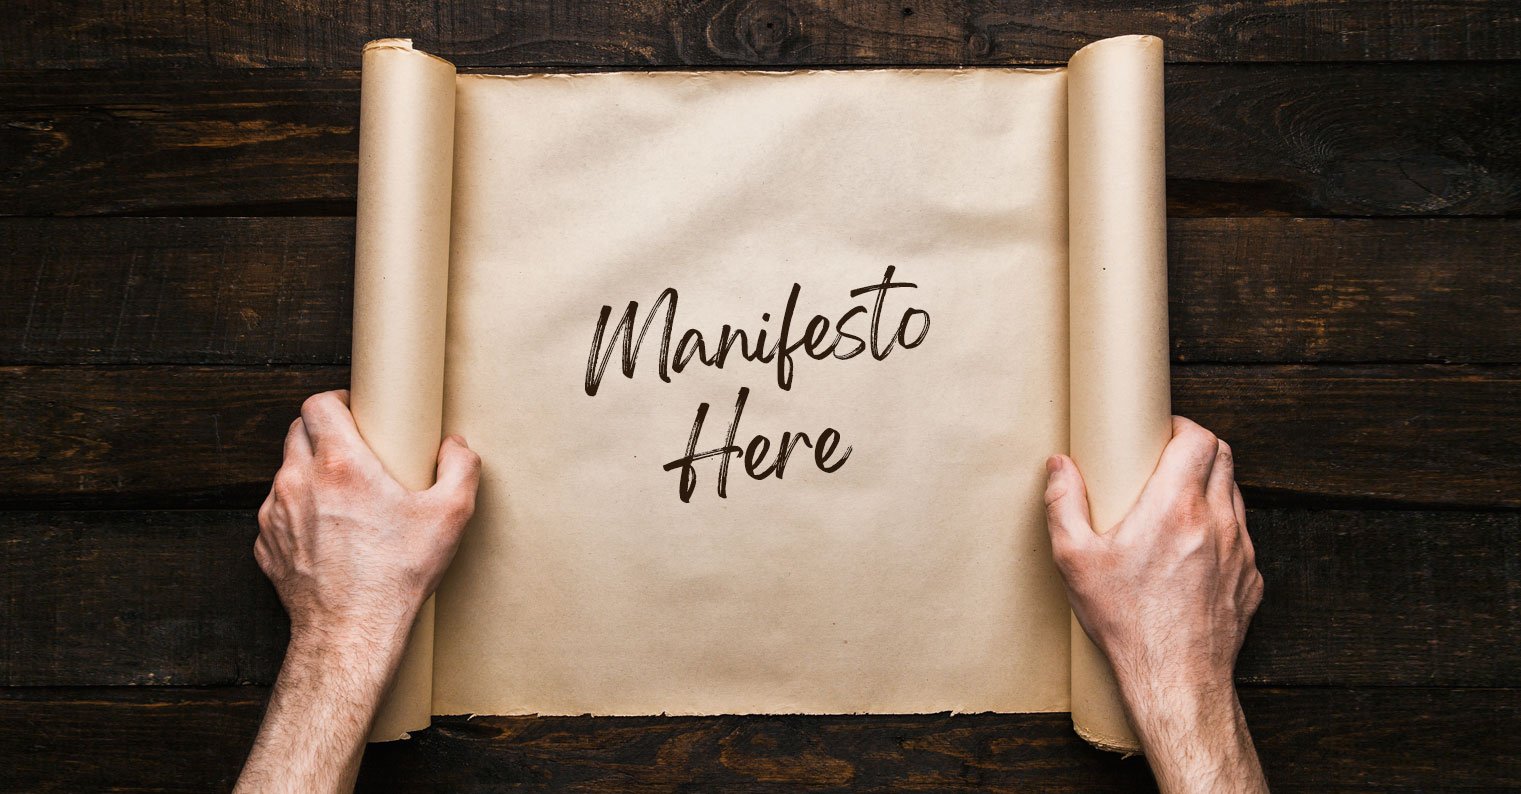 Two hands unroll butcher paper with "Manifesto Here" handwritten on it